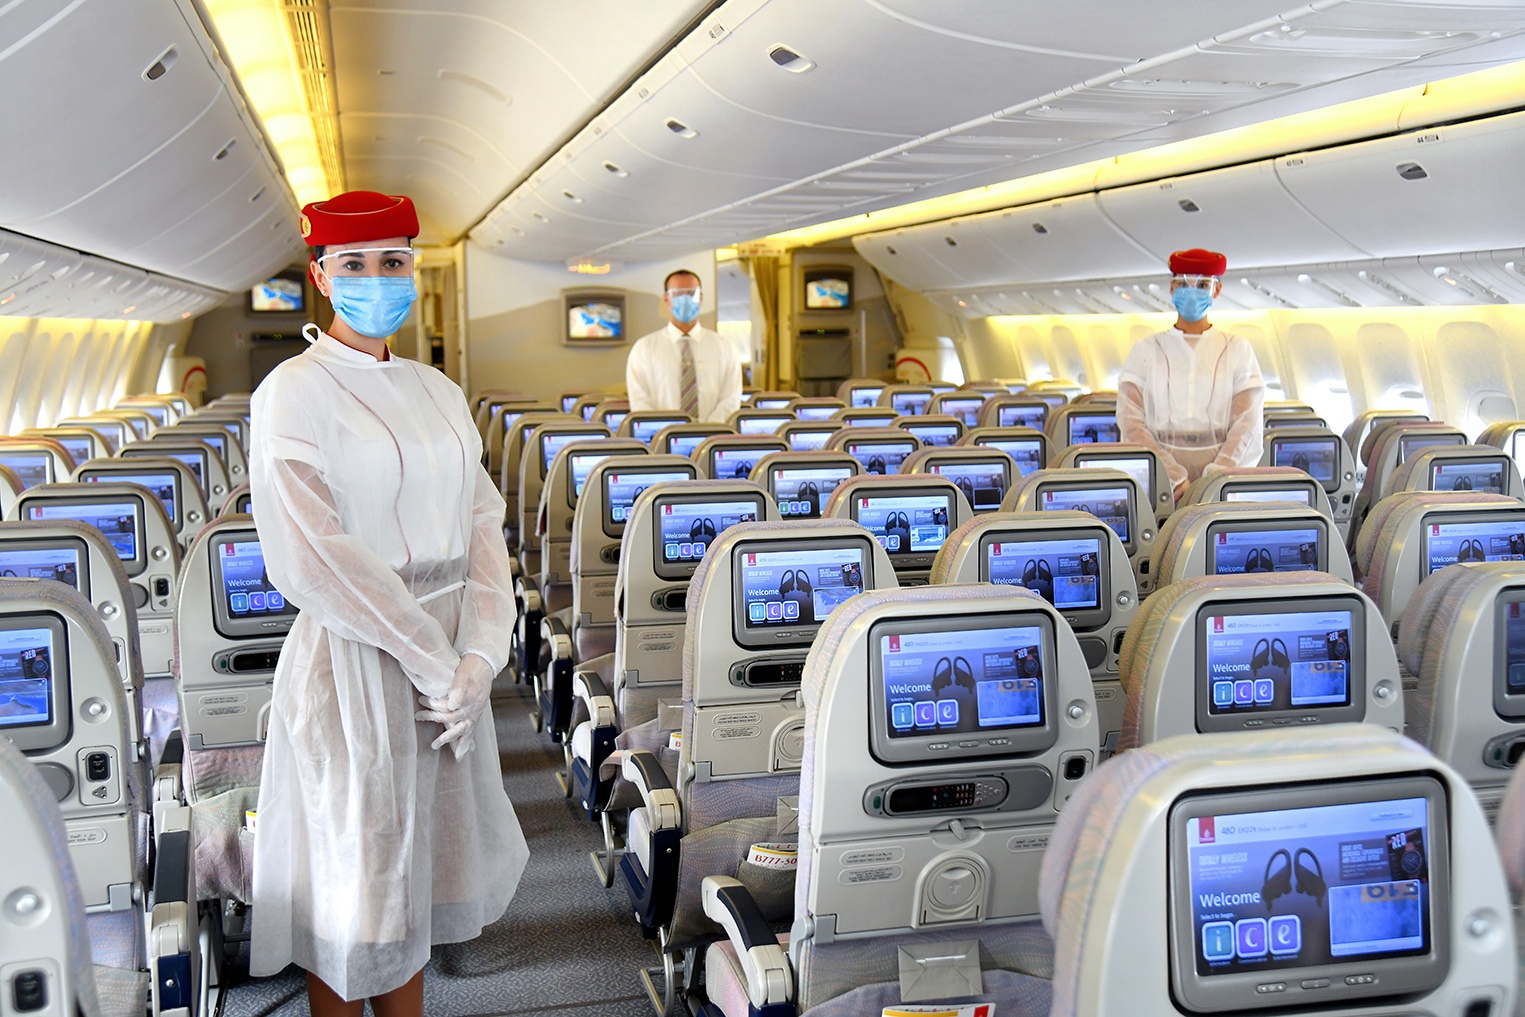 Emirates Flight Attendants And Passengers To Cover Up